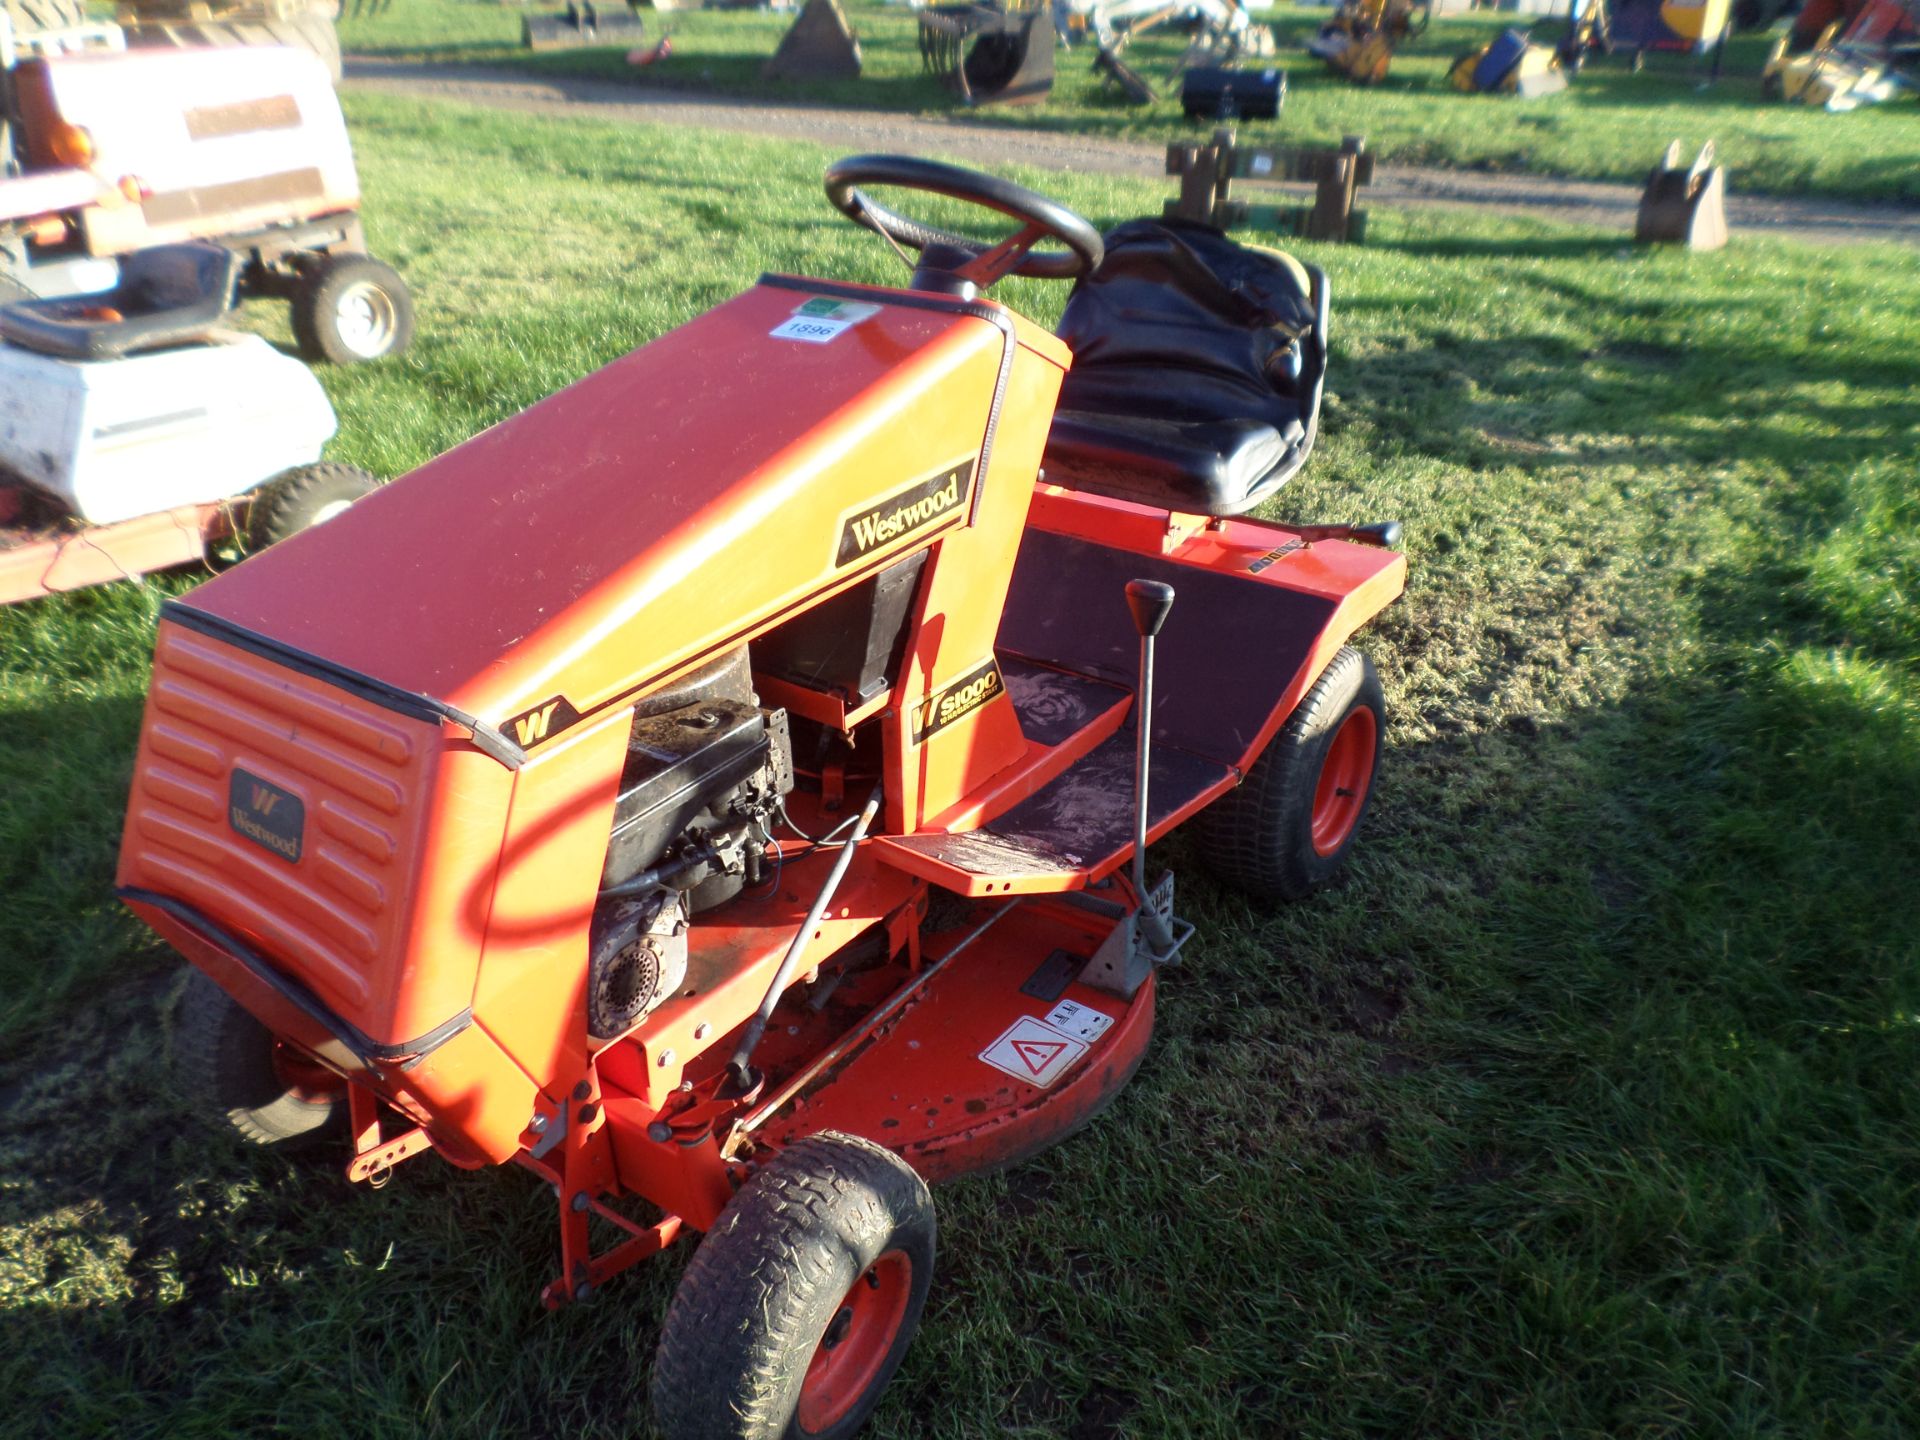 Westwood S1000 electric start ride on mower, side discharge deck, used this season but not serviced